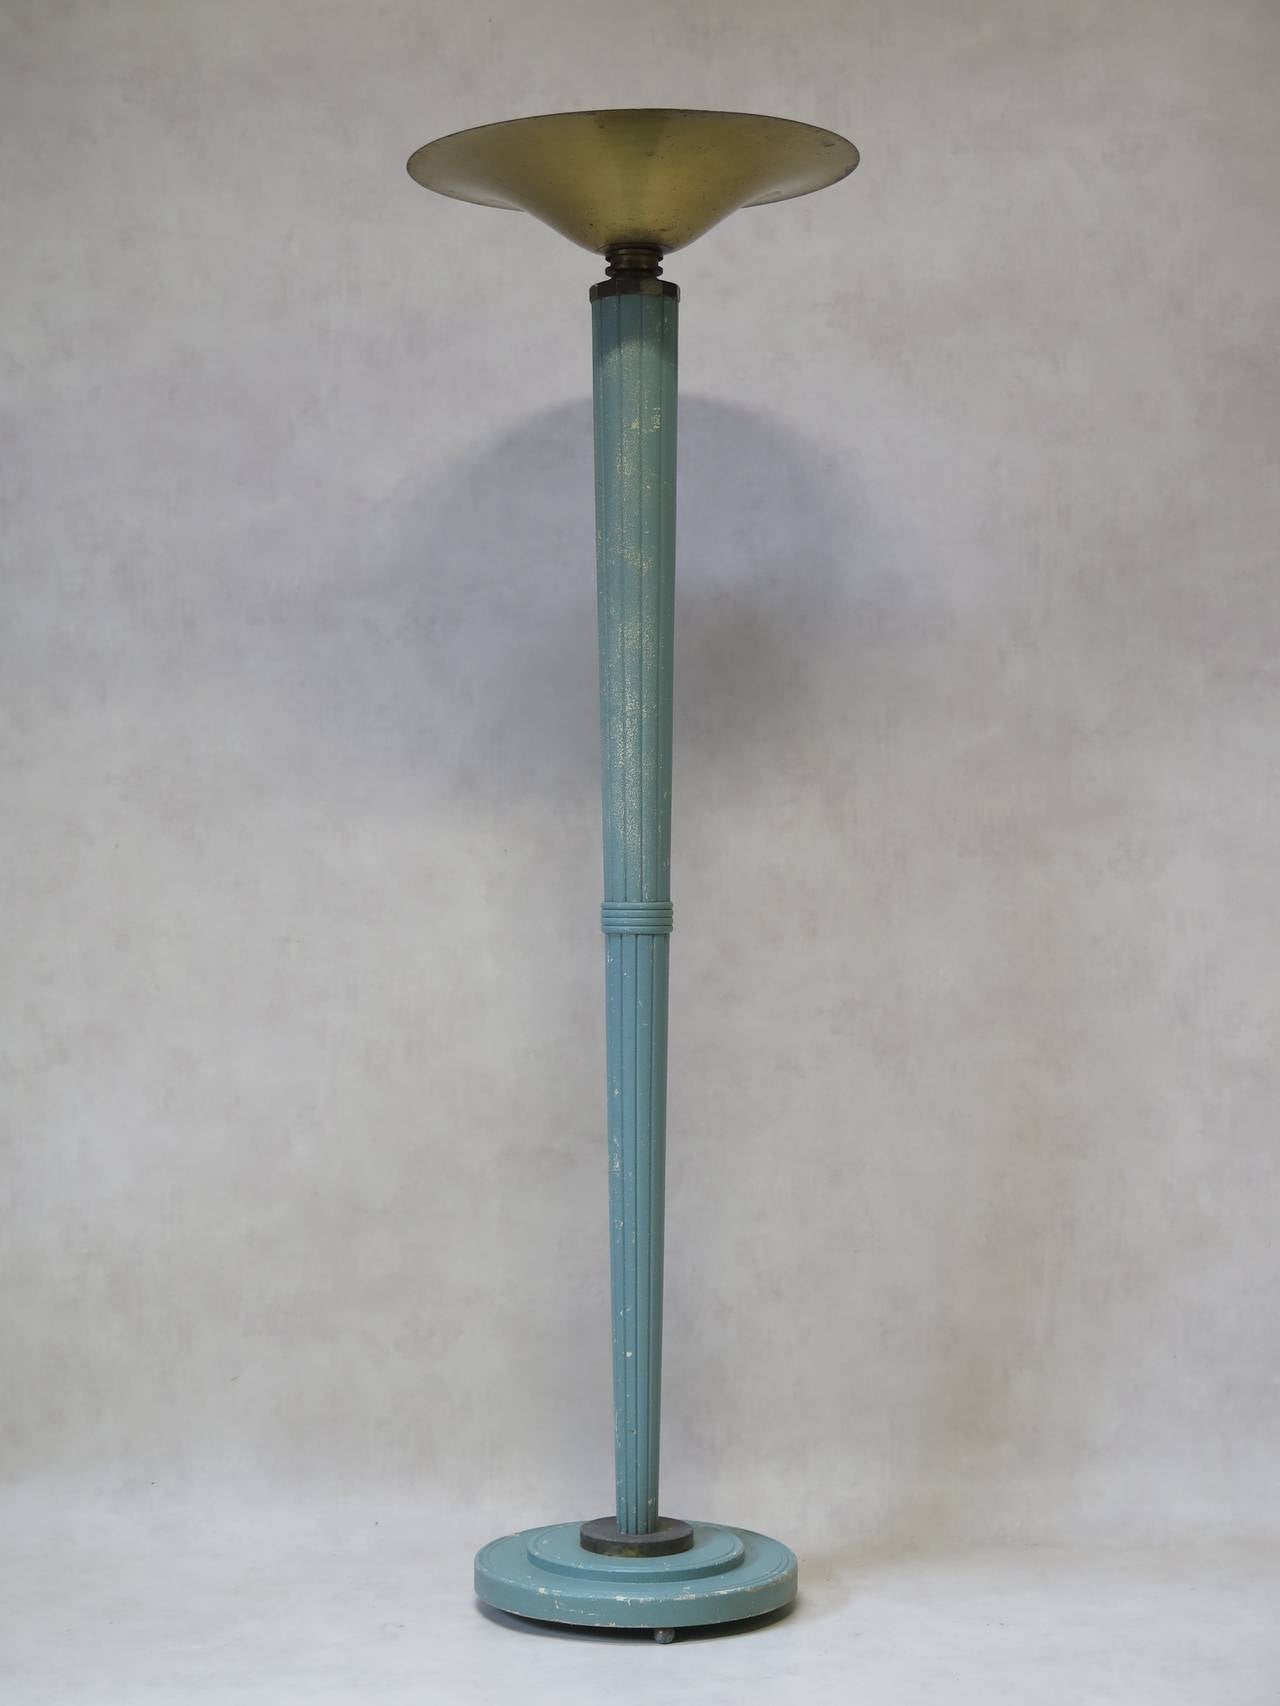 Elegant 1930s Art Deco floor lamp with a tapering and reeded wood column, painted light blue-green. Stepped base. The column supports a large oxidzed brass bowl.